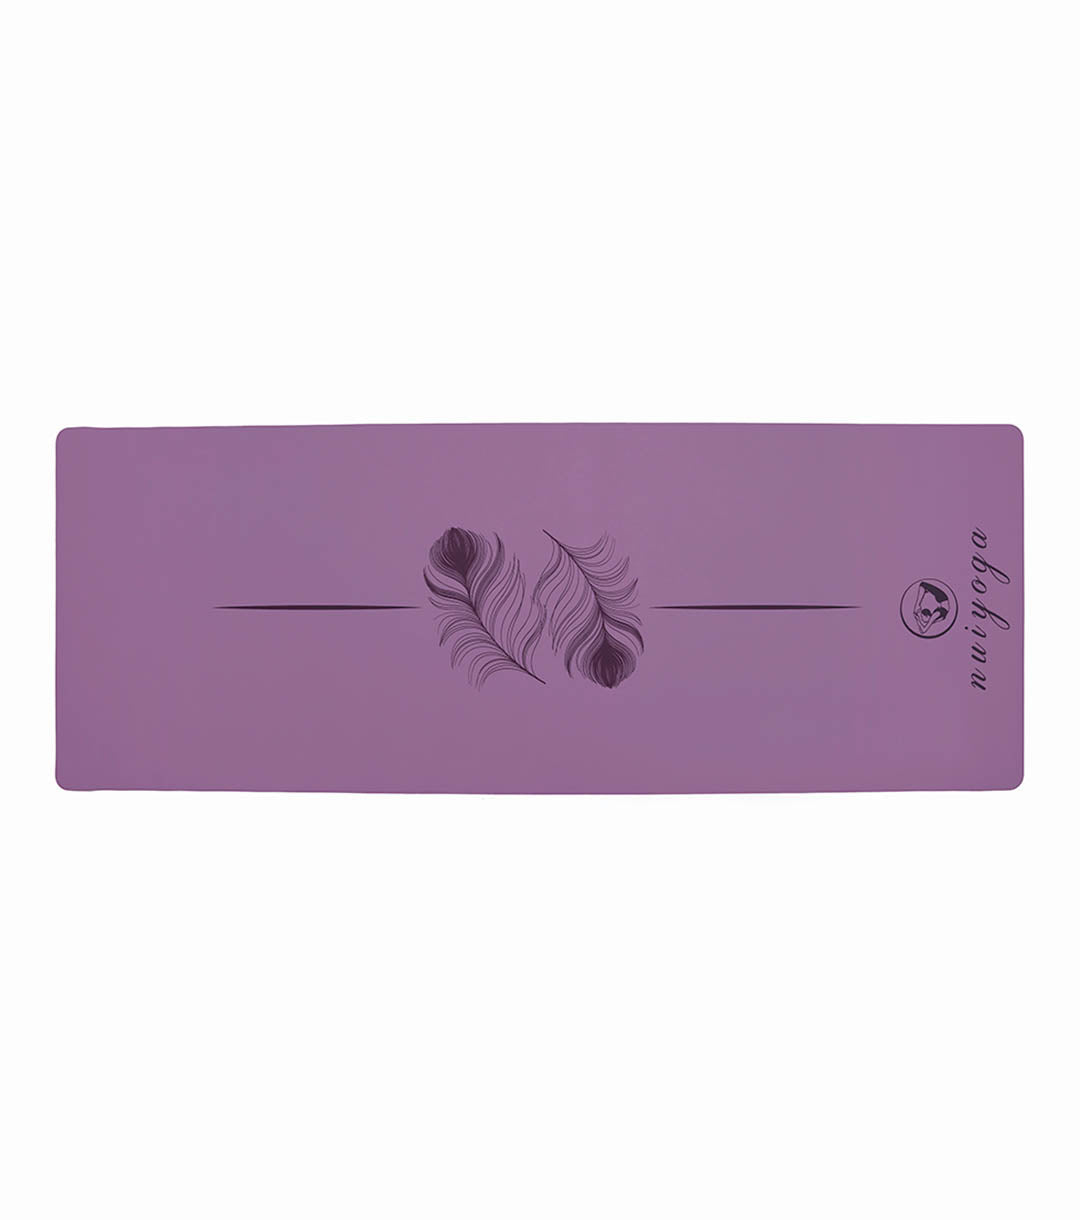 Yoga Mat - Purple Leopard - AMP Wellbeing - INYDY